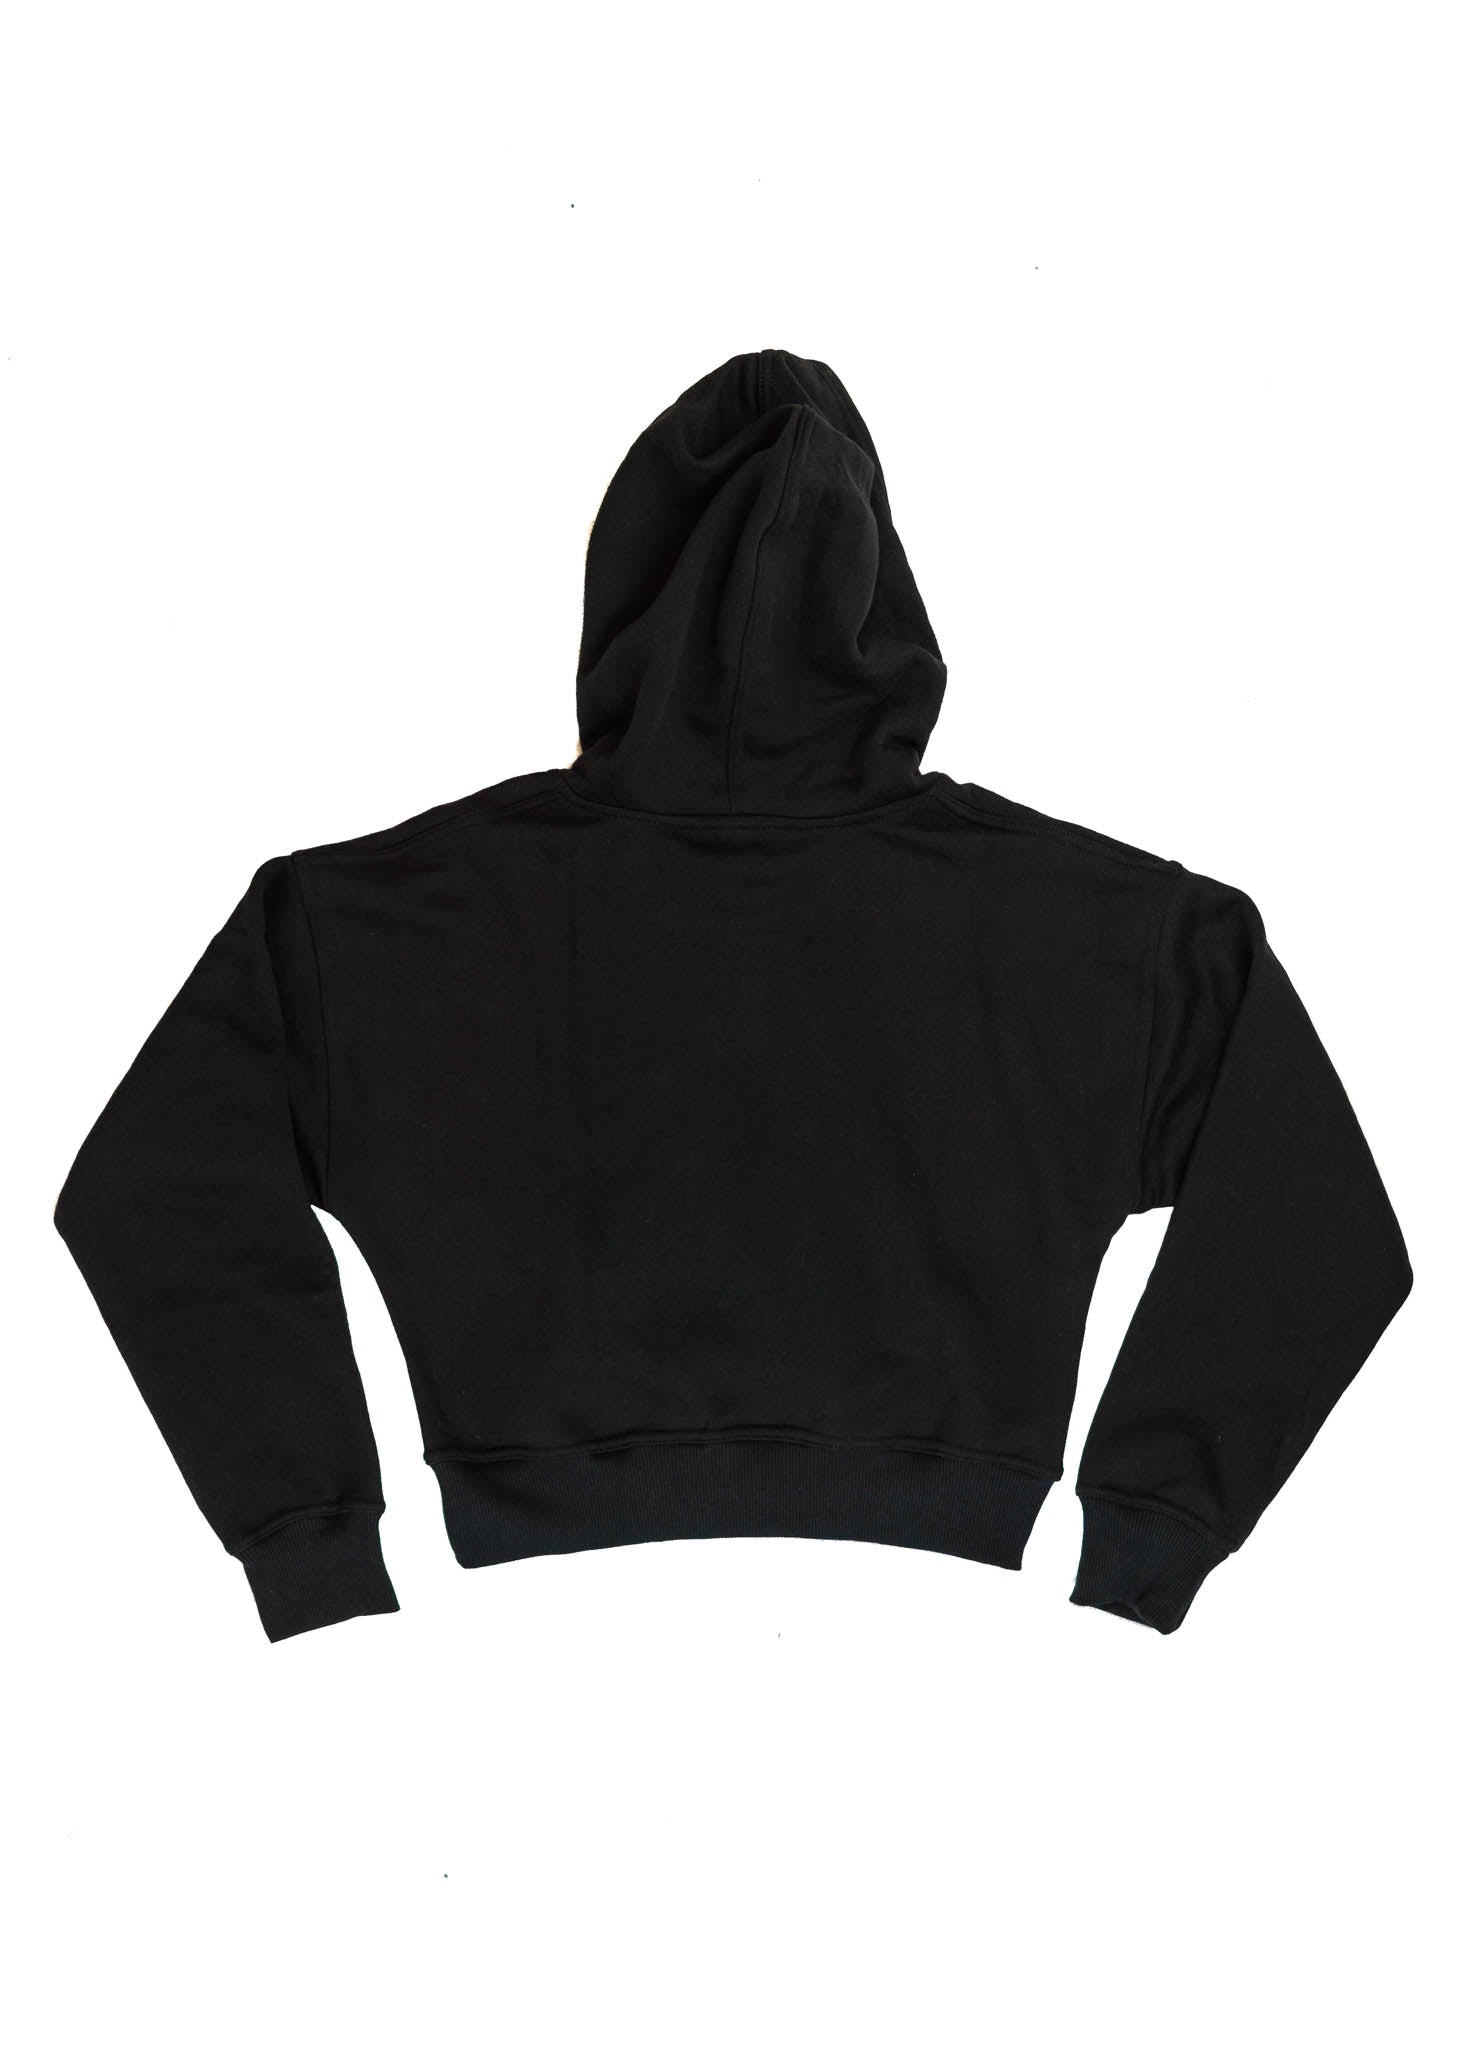 A black BMW cropped hoodie for women. Photo is a back view of the cropped sweater with an embroidered BMW 2002 Turbo. Fabric composition is 100% cotton. The material is soft, comfortable, breathable, and non-transparent. The style of this crop hoodie is long sleeve, crewneck with a hood, hooded, with embroidery on the chest.